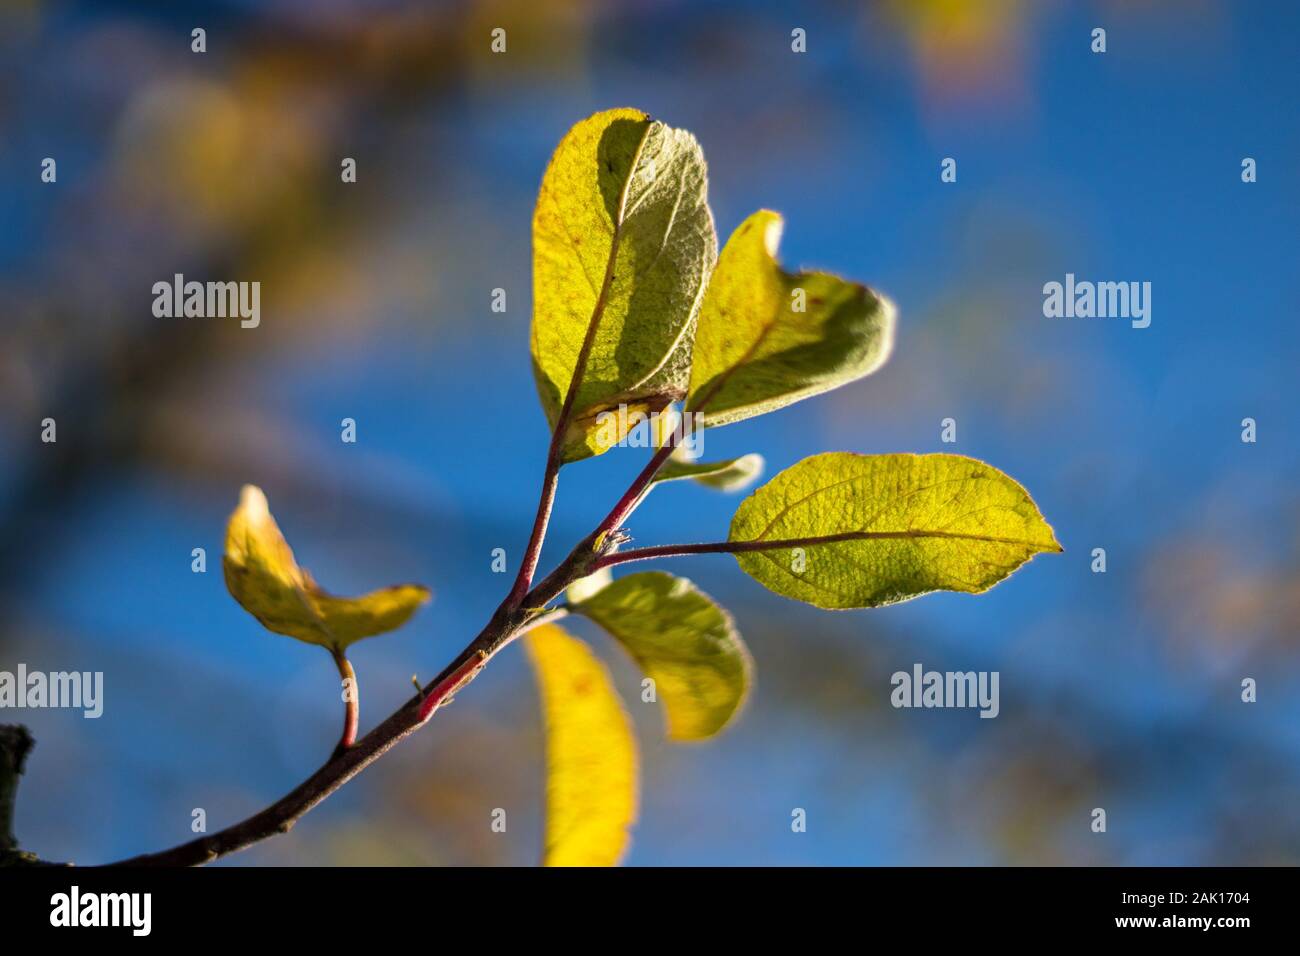 autumn leaves on tree - small autumn yellow leaves on a branch of apple tree, blue sky Stock Photo